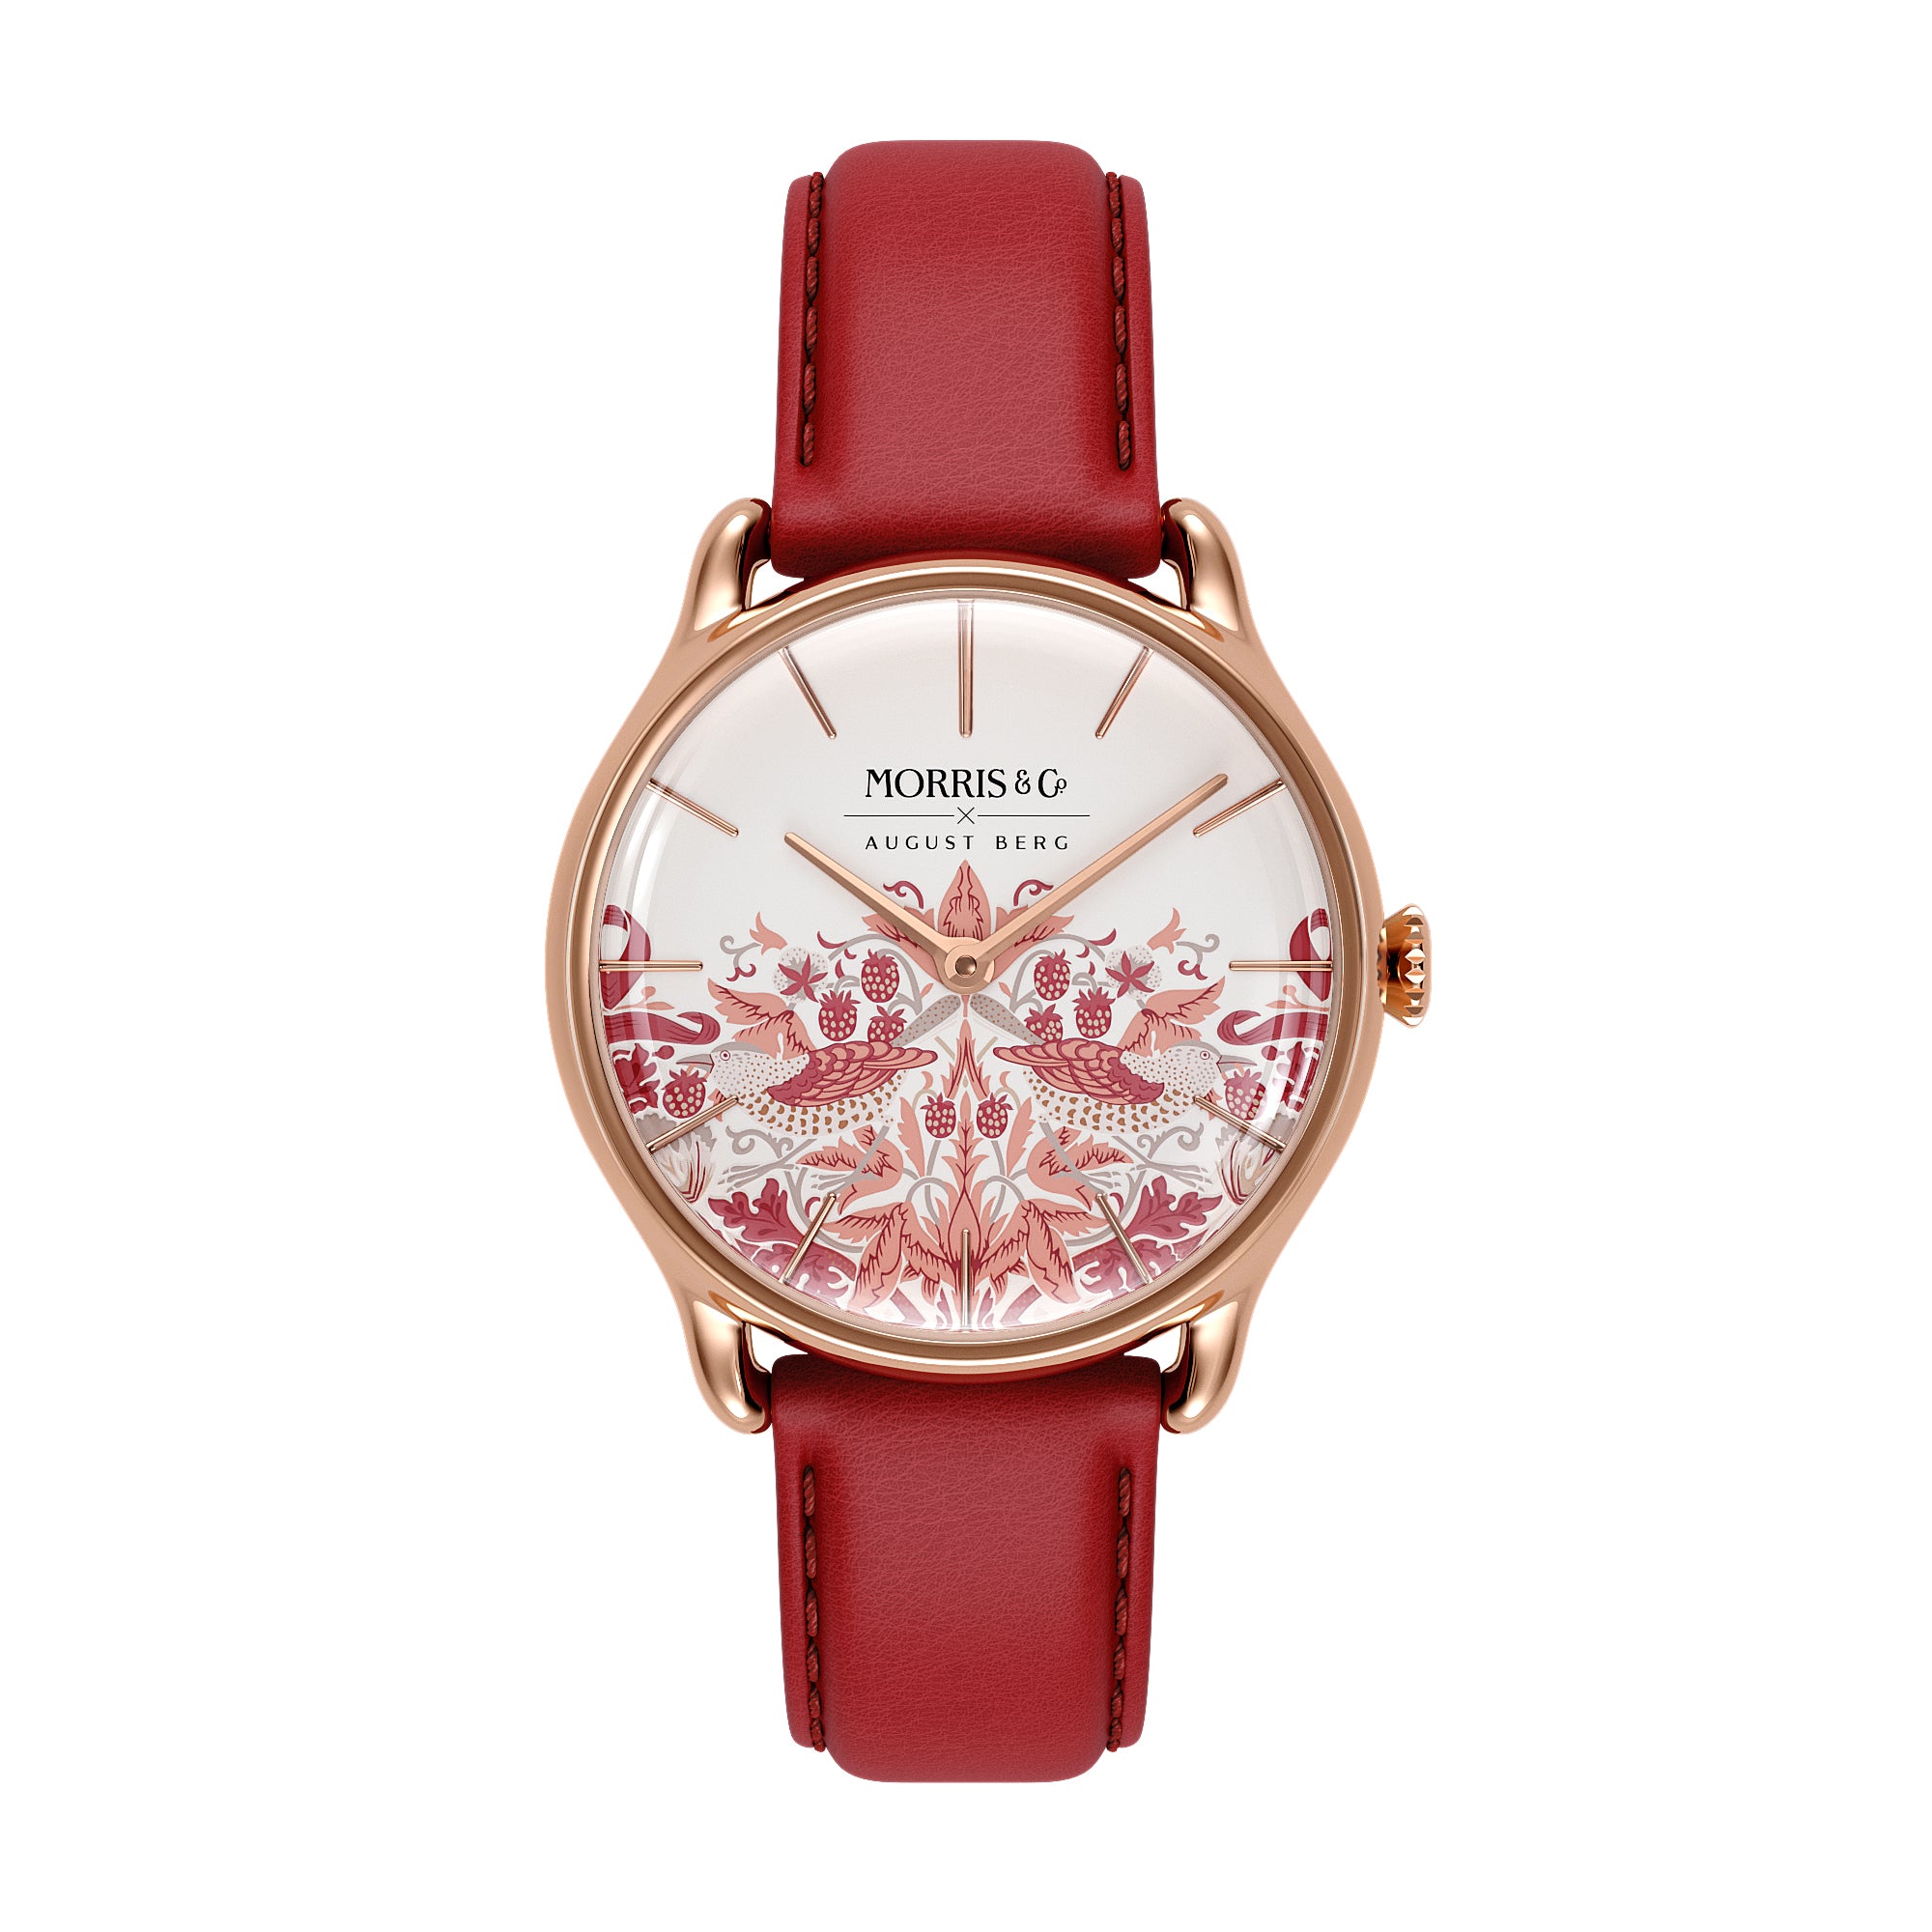 AUGUST BERG x MORRIS & CO. | Rose Gold Strawberry Thief | Madder Rouge Italian Leather